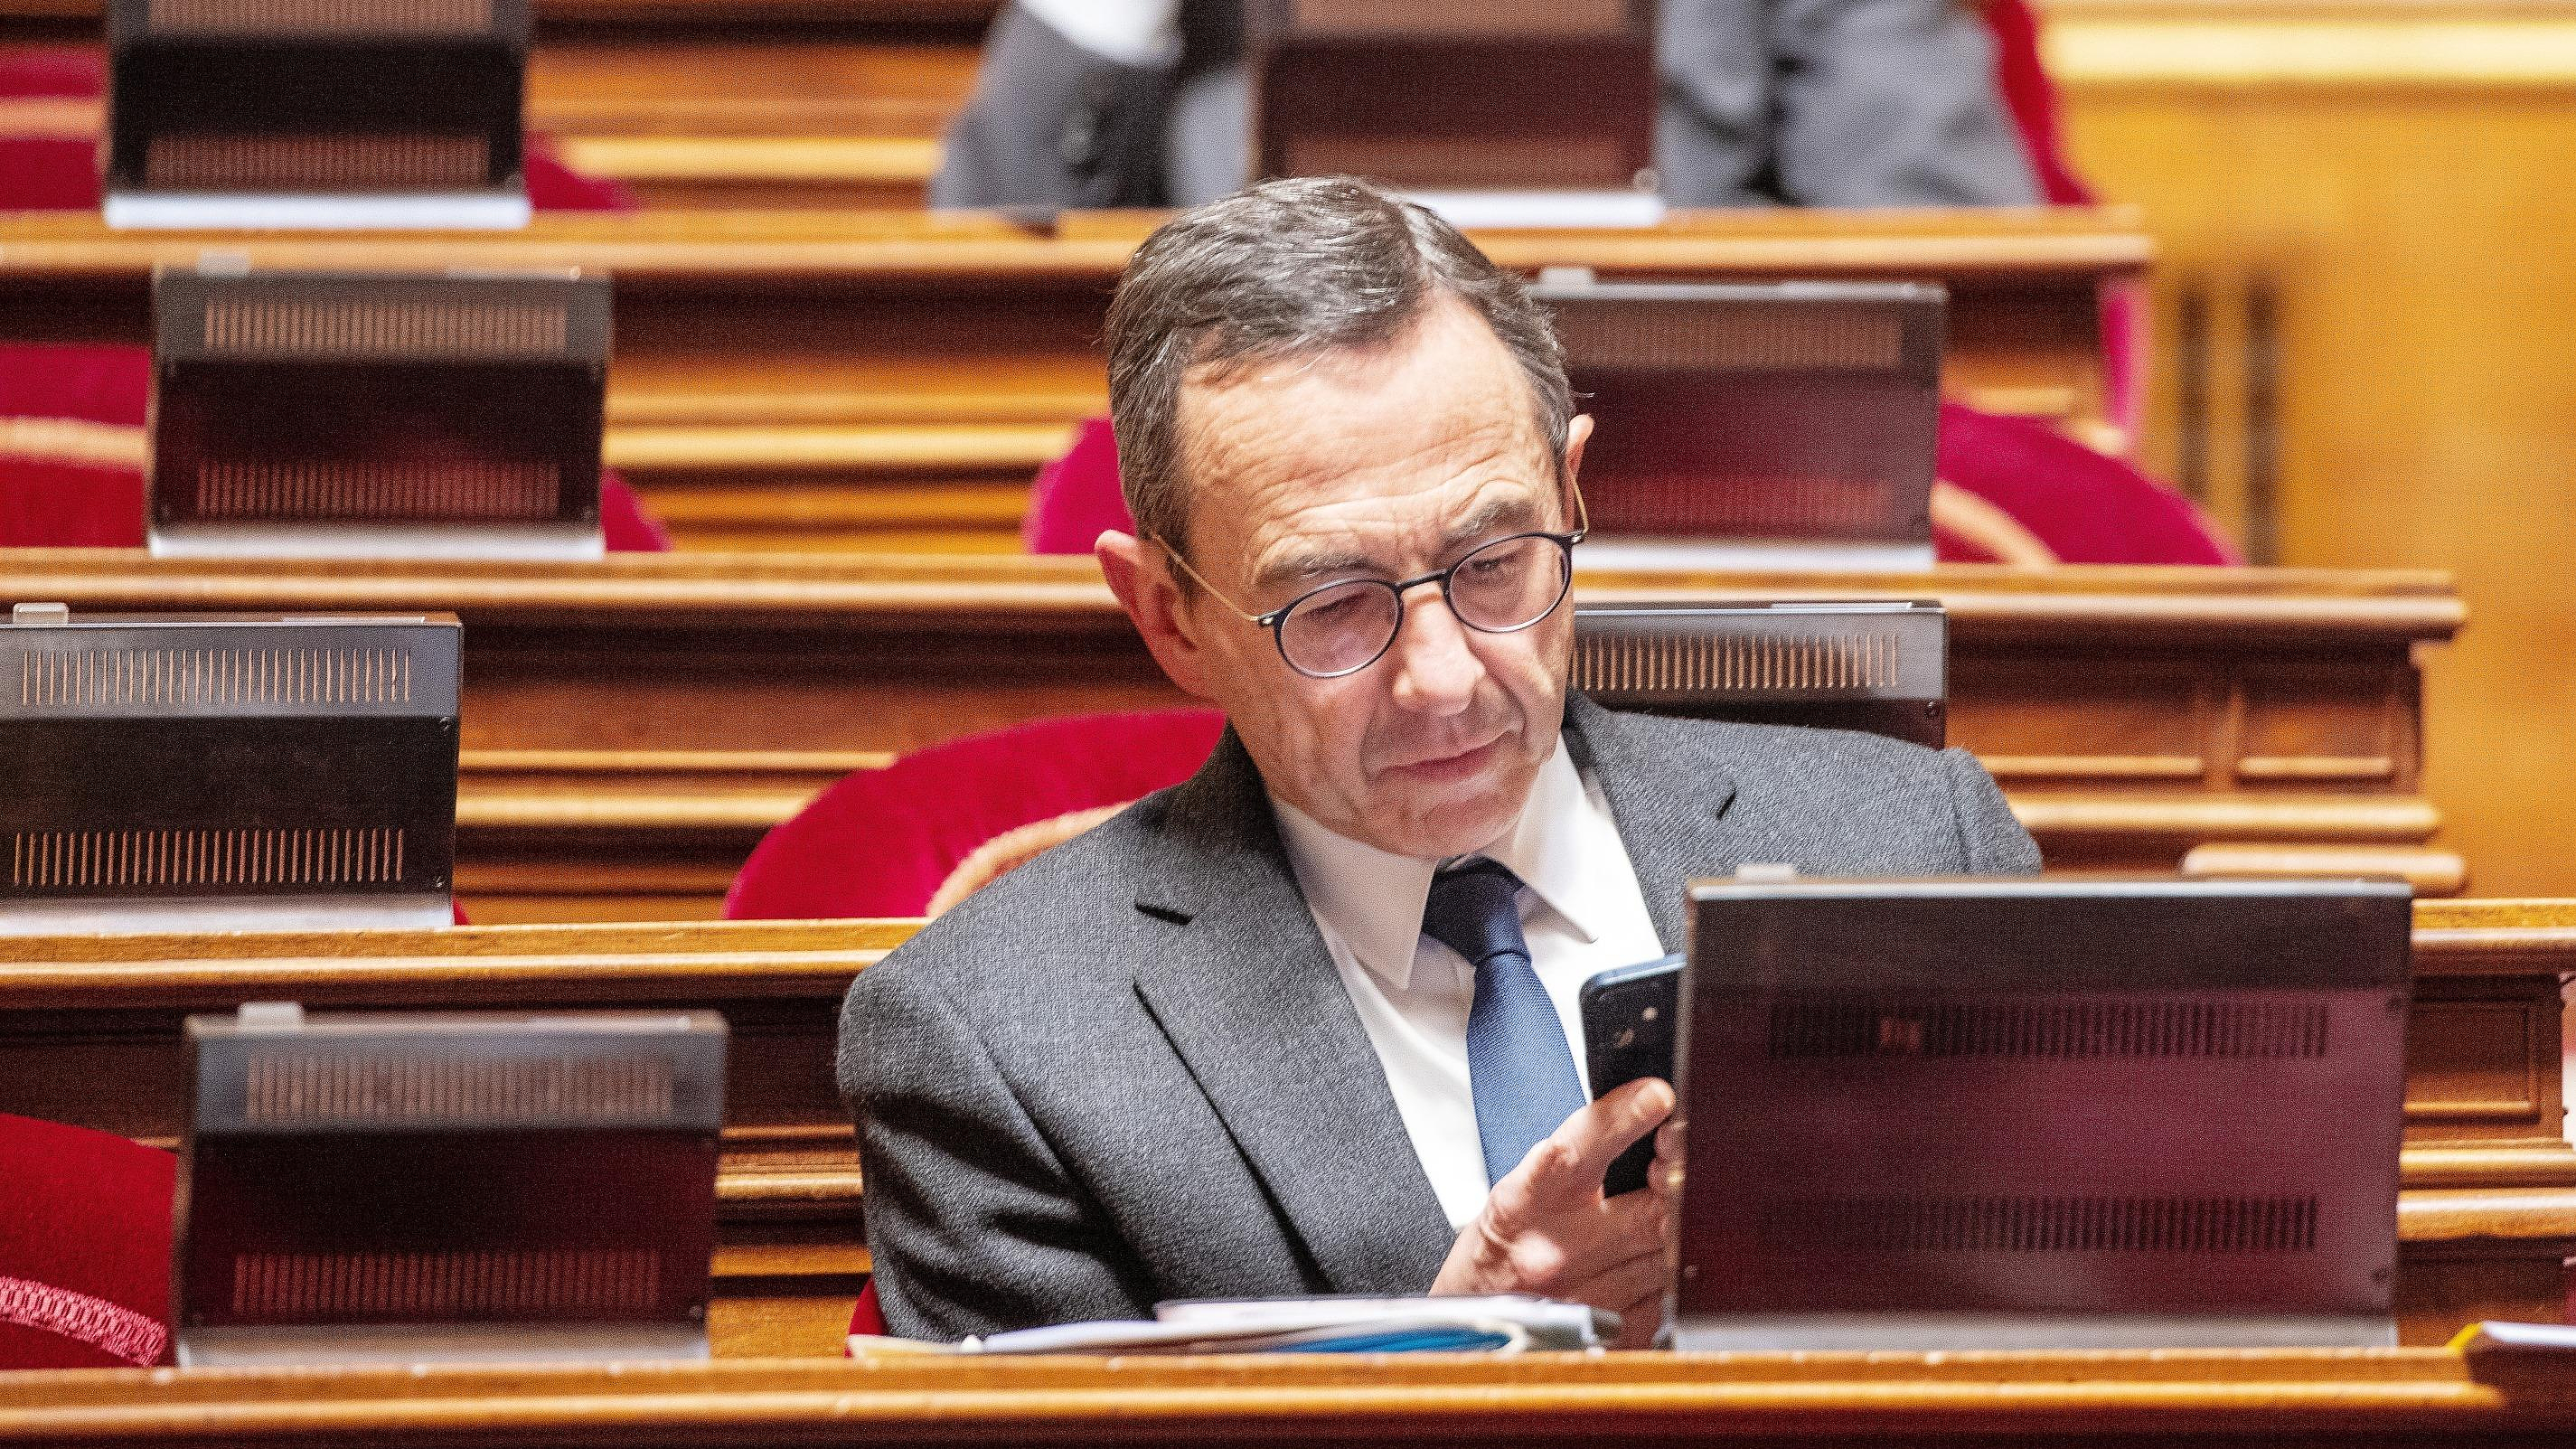 The right deplores a “dismal agreement” on the end of careers at the SNCF